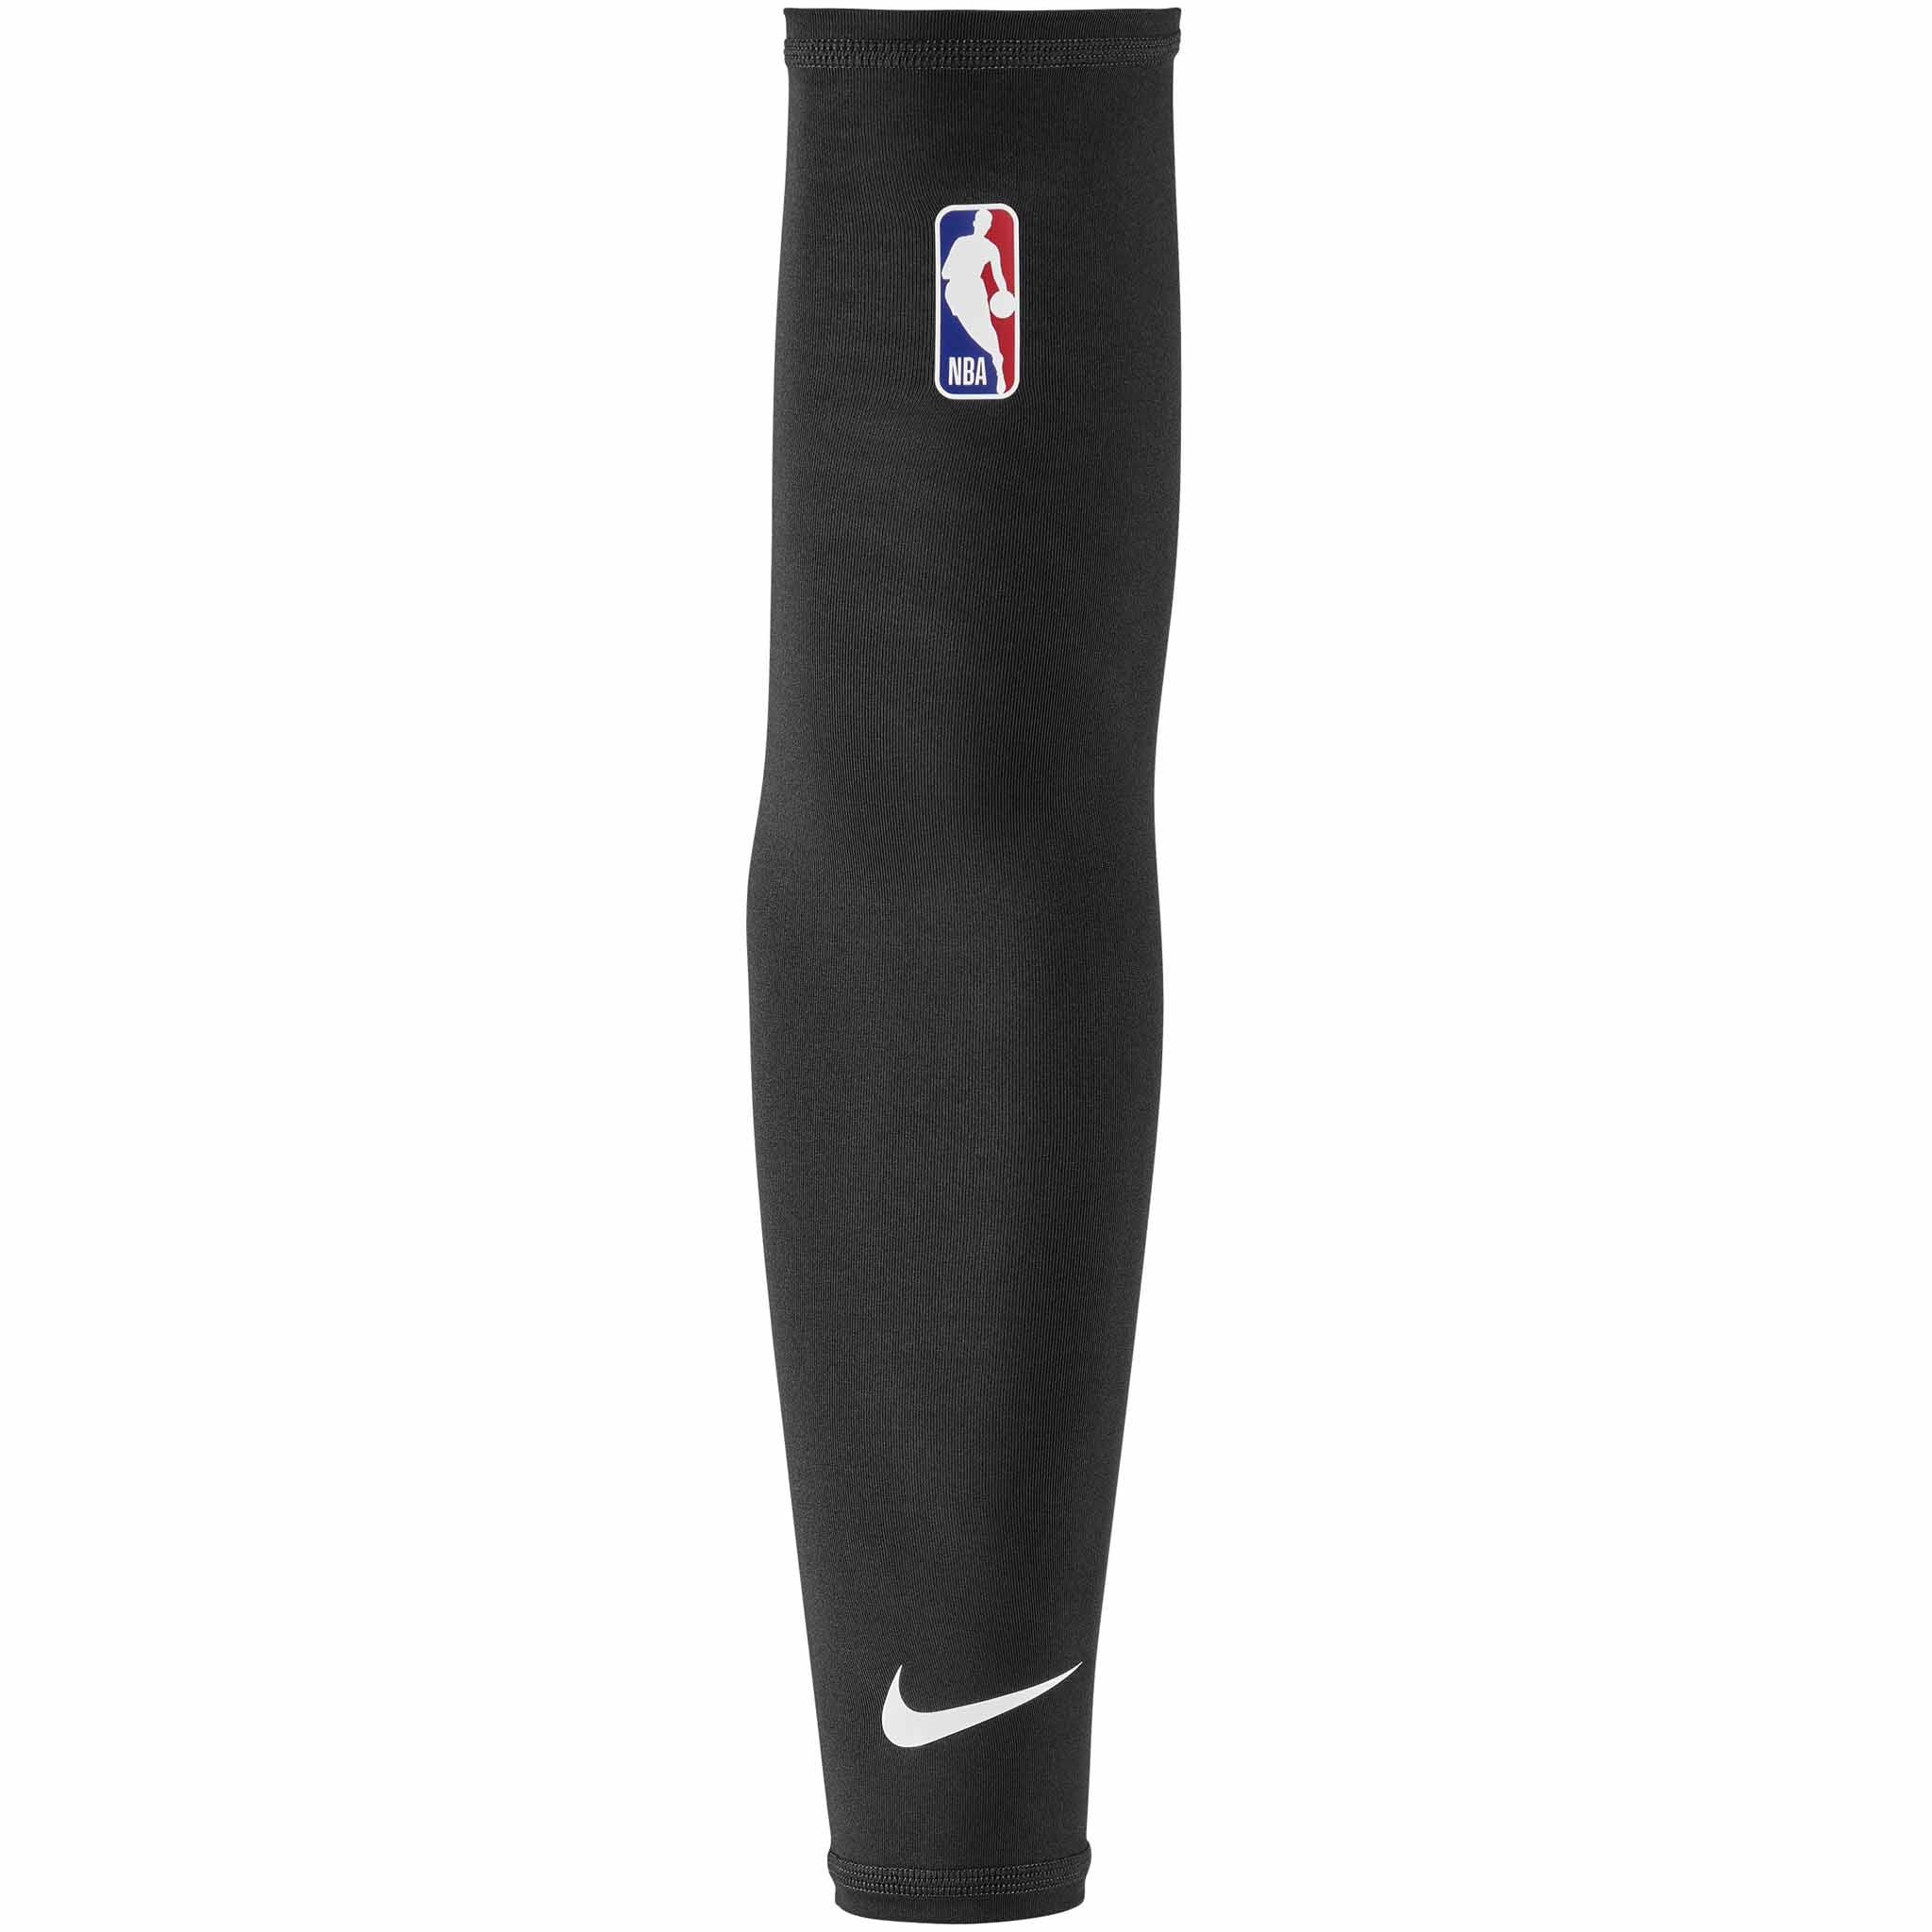 2Pcs Compression Arm Sleeves Basketball Cycling Arm Support